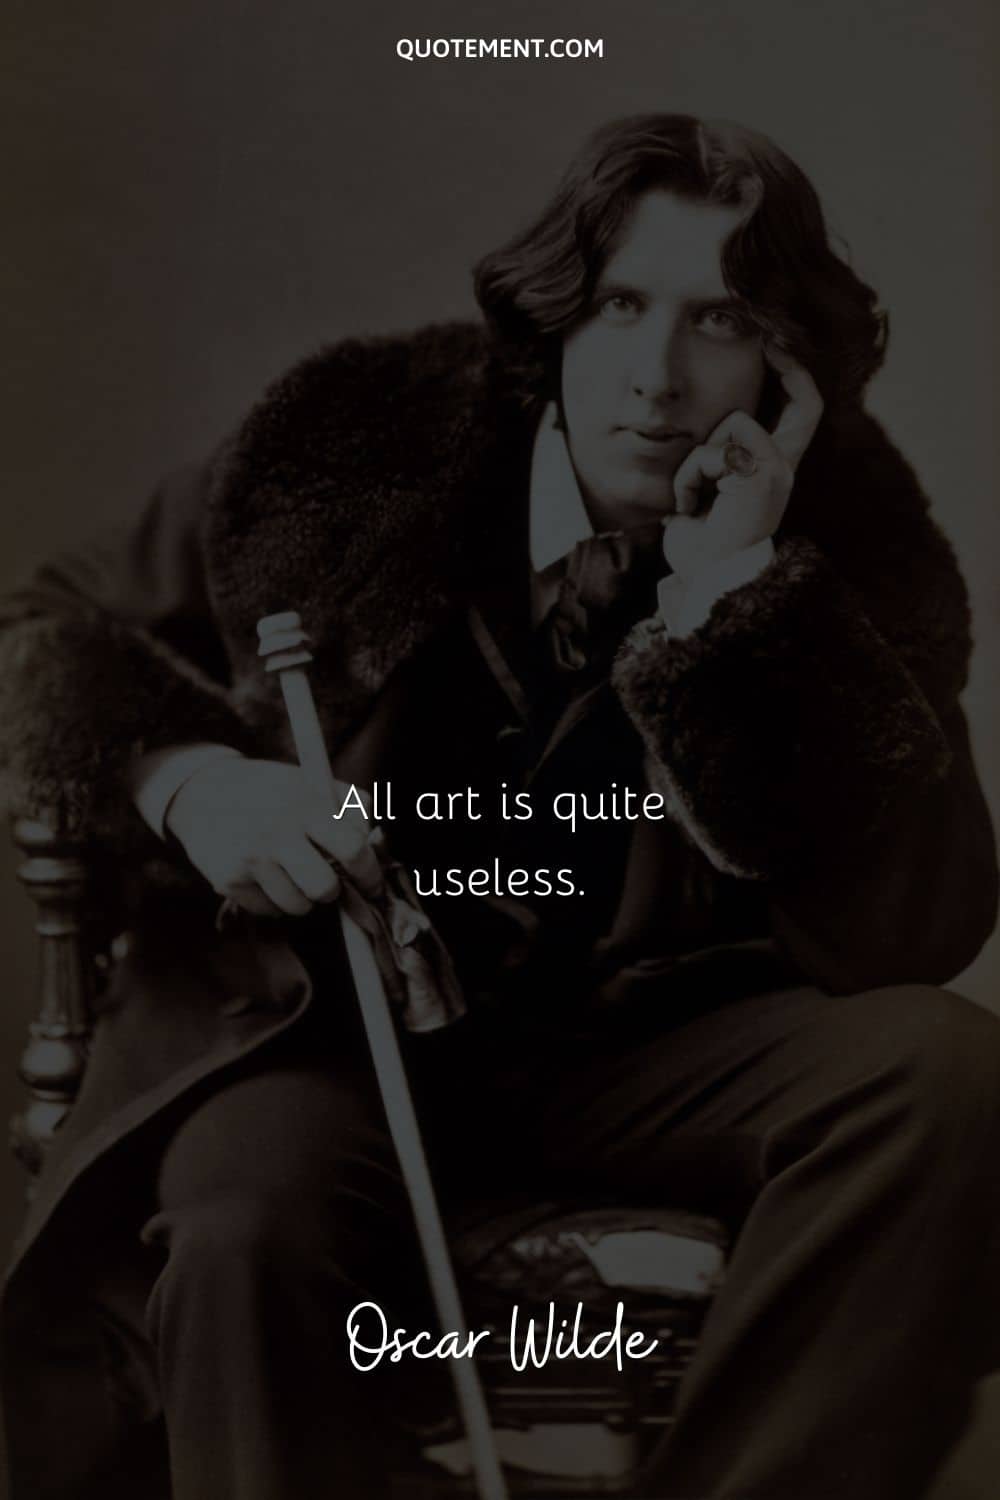 “All art is quite useless.” ― Oscar Wilde (Preface of The Picture of Dorian Gray)